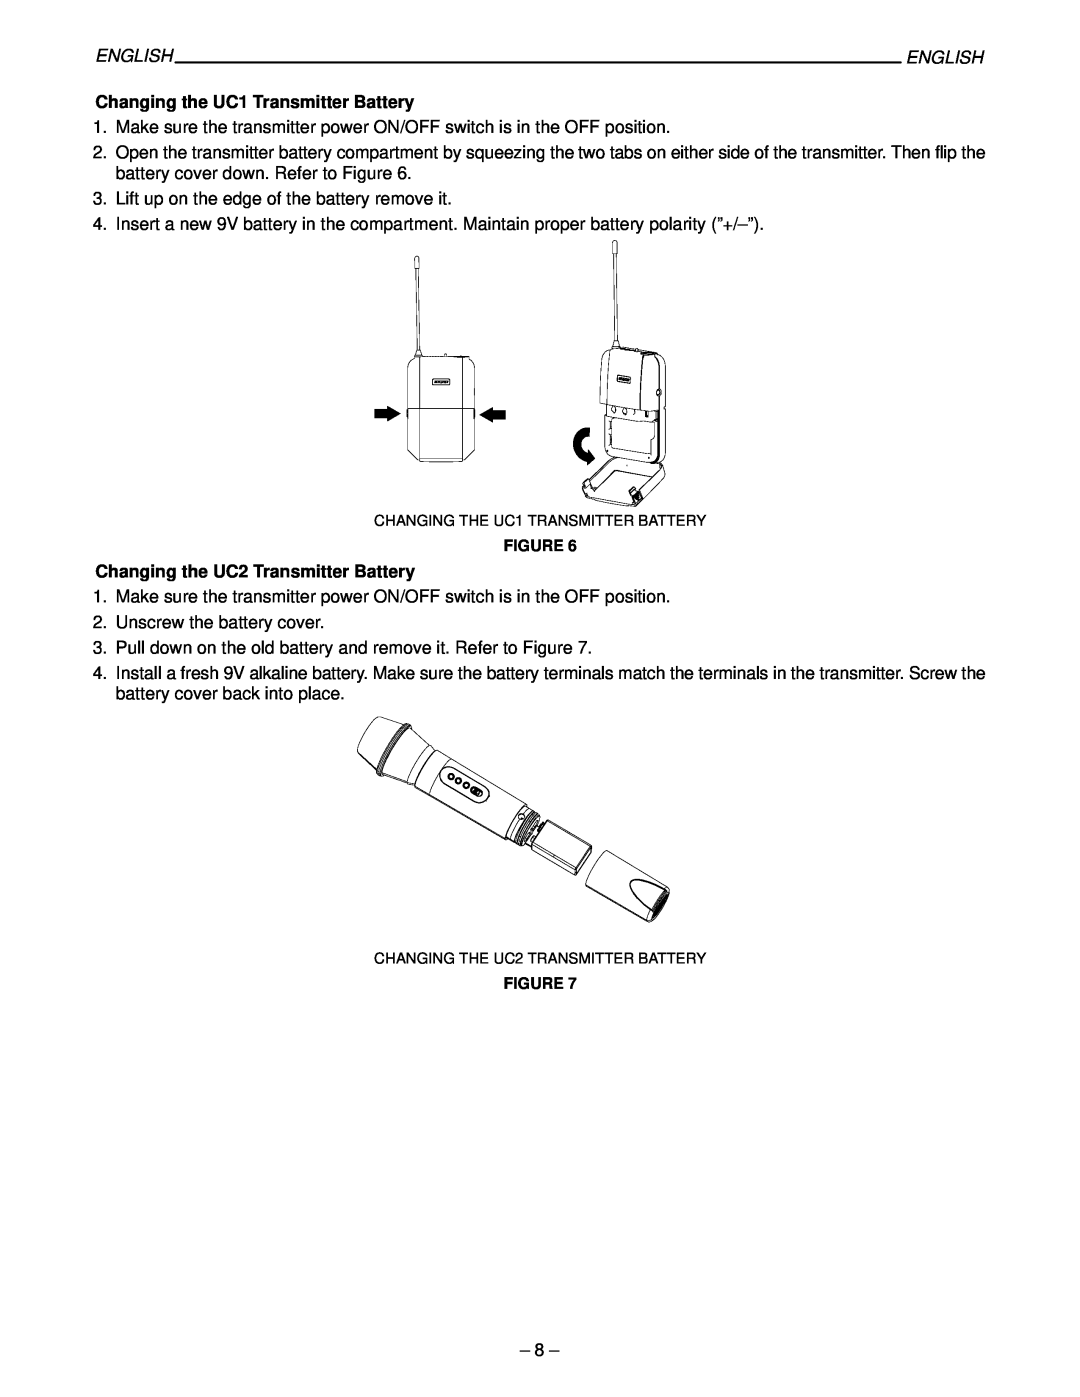 Shure 27B8614, UC Wireless System manual Changing the UC1 Transmitter Battery, Changing the UC2 Transmitter Battery, English 